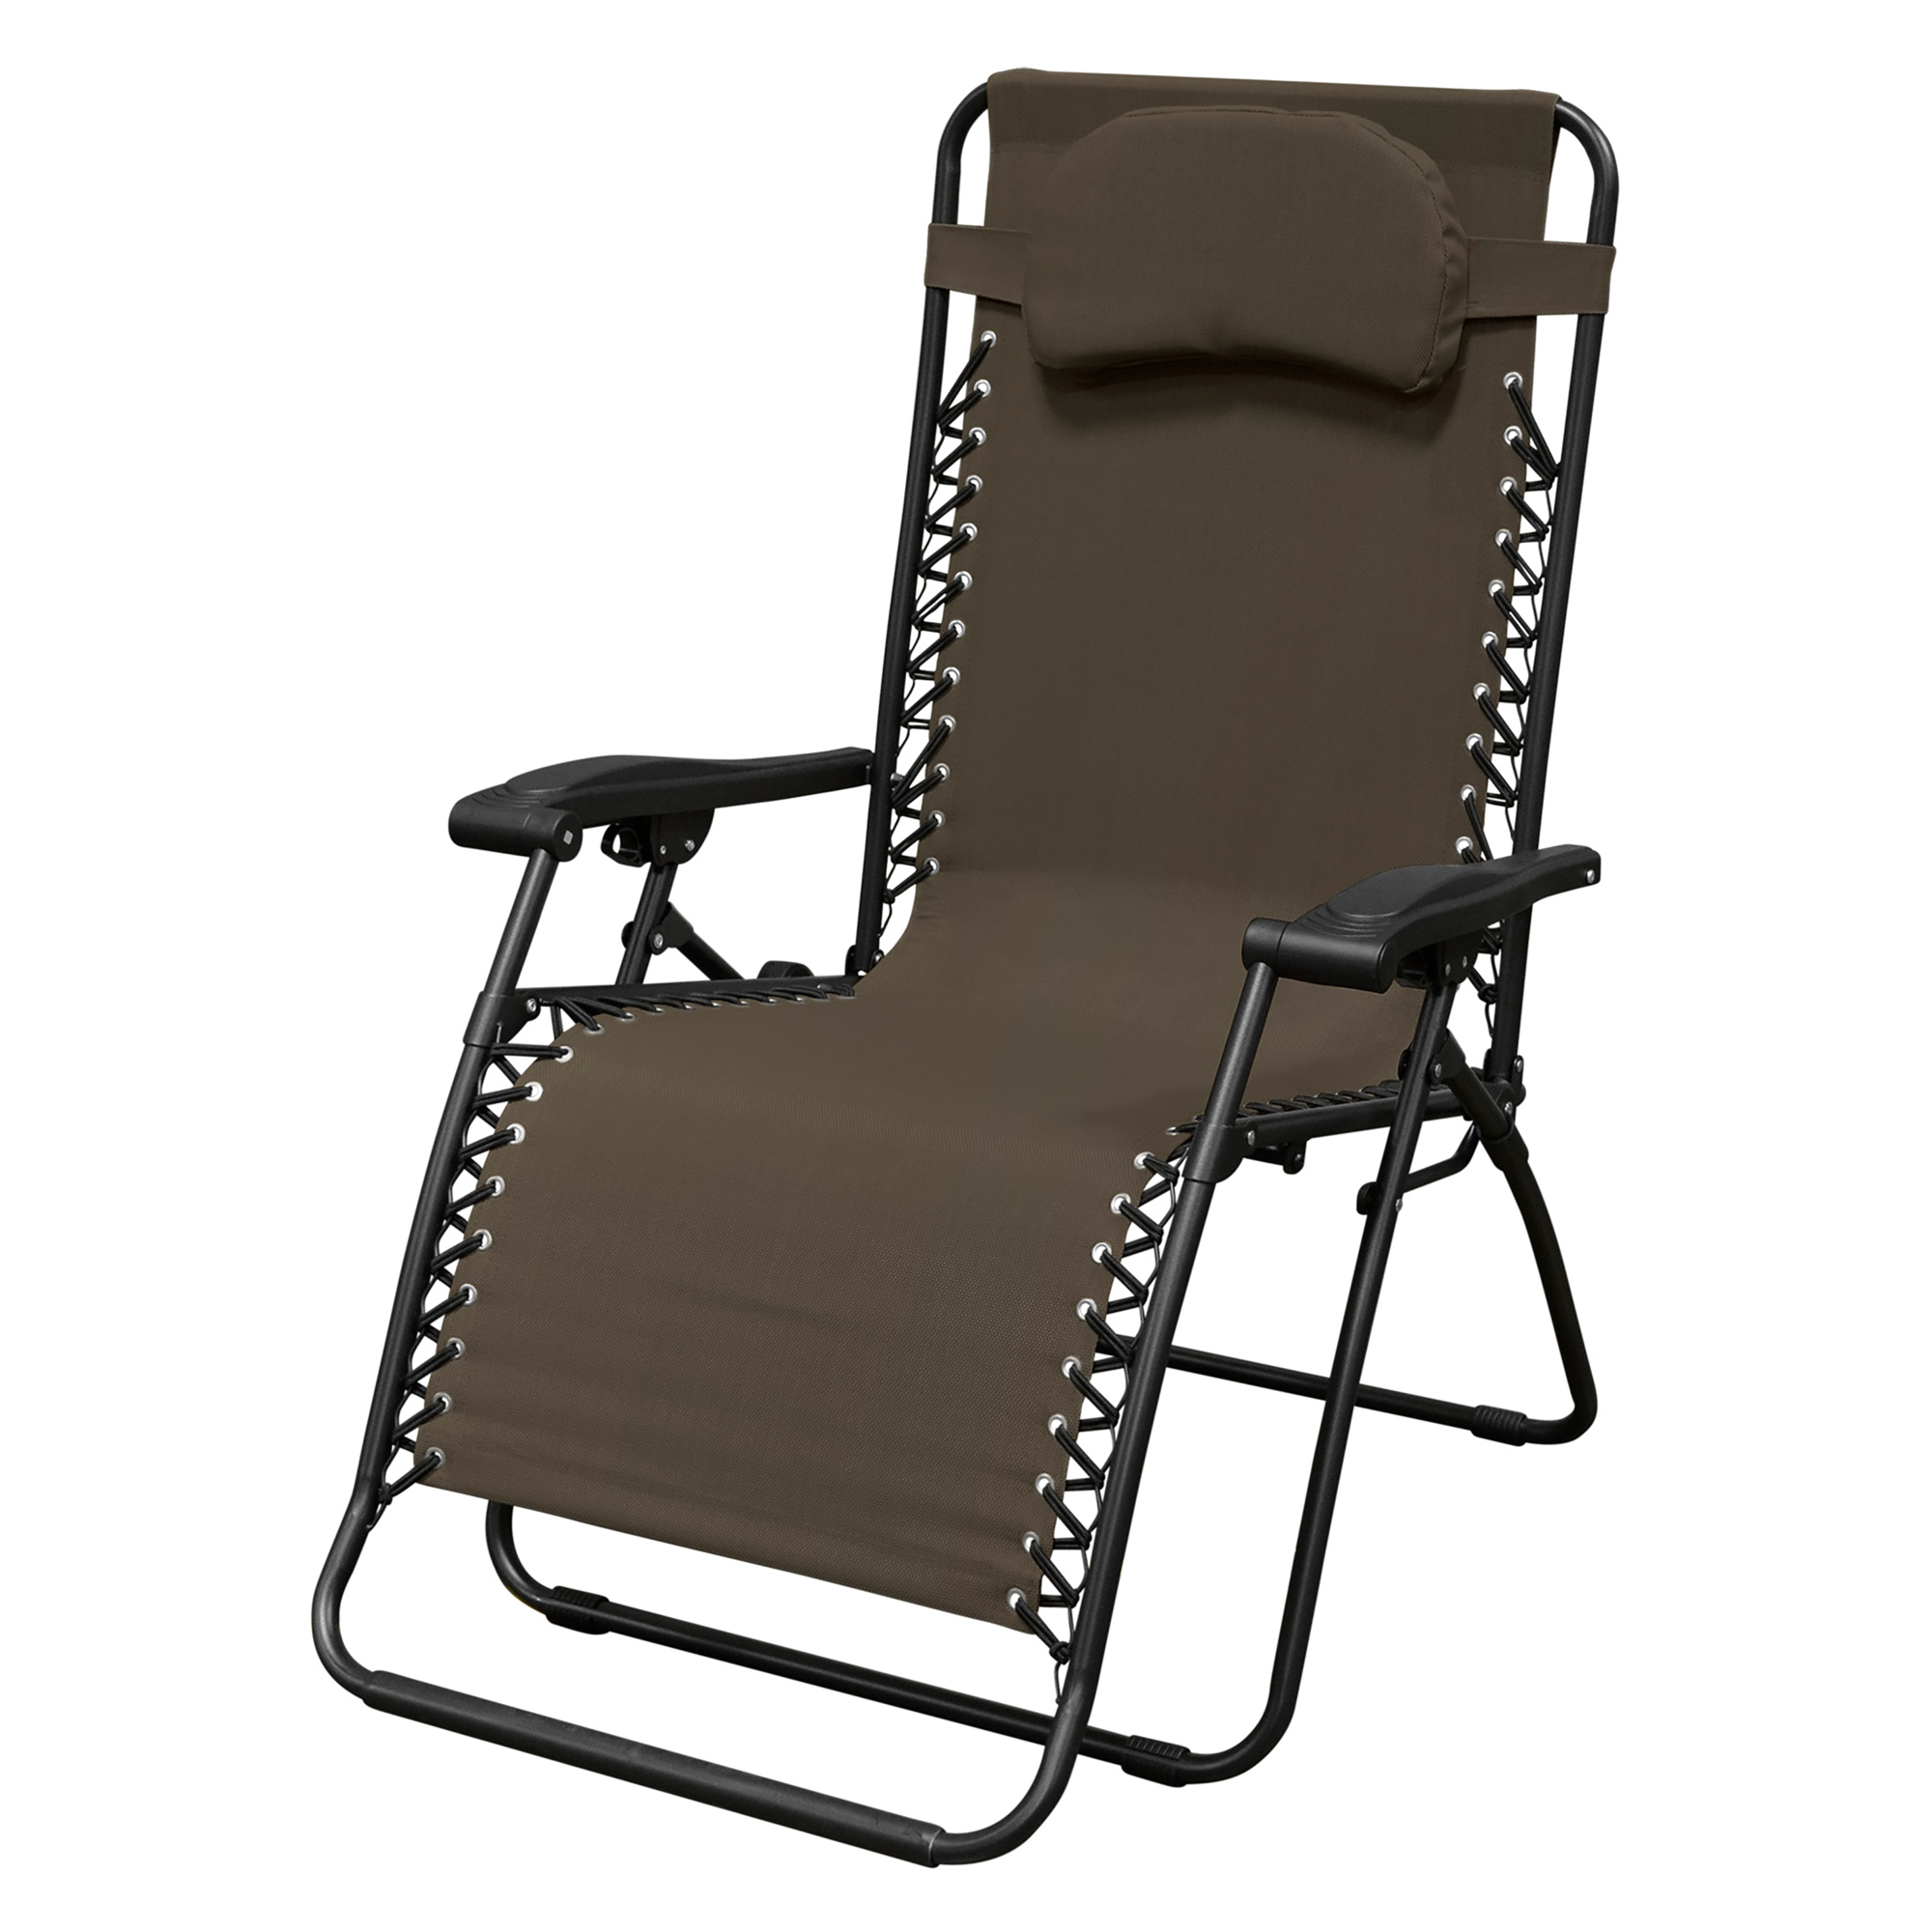 Caravan Canopy, Infinity Oversized Zero Gravity Chair Lounger, Primary Color Brown, Material Textile, Width 31.1 in, Model 80009000161